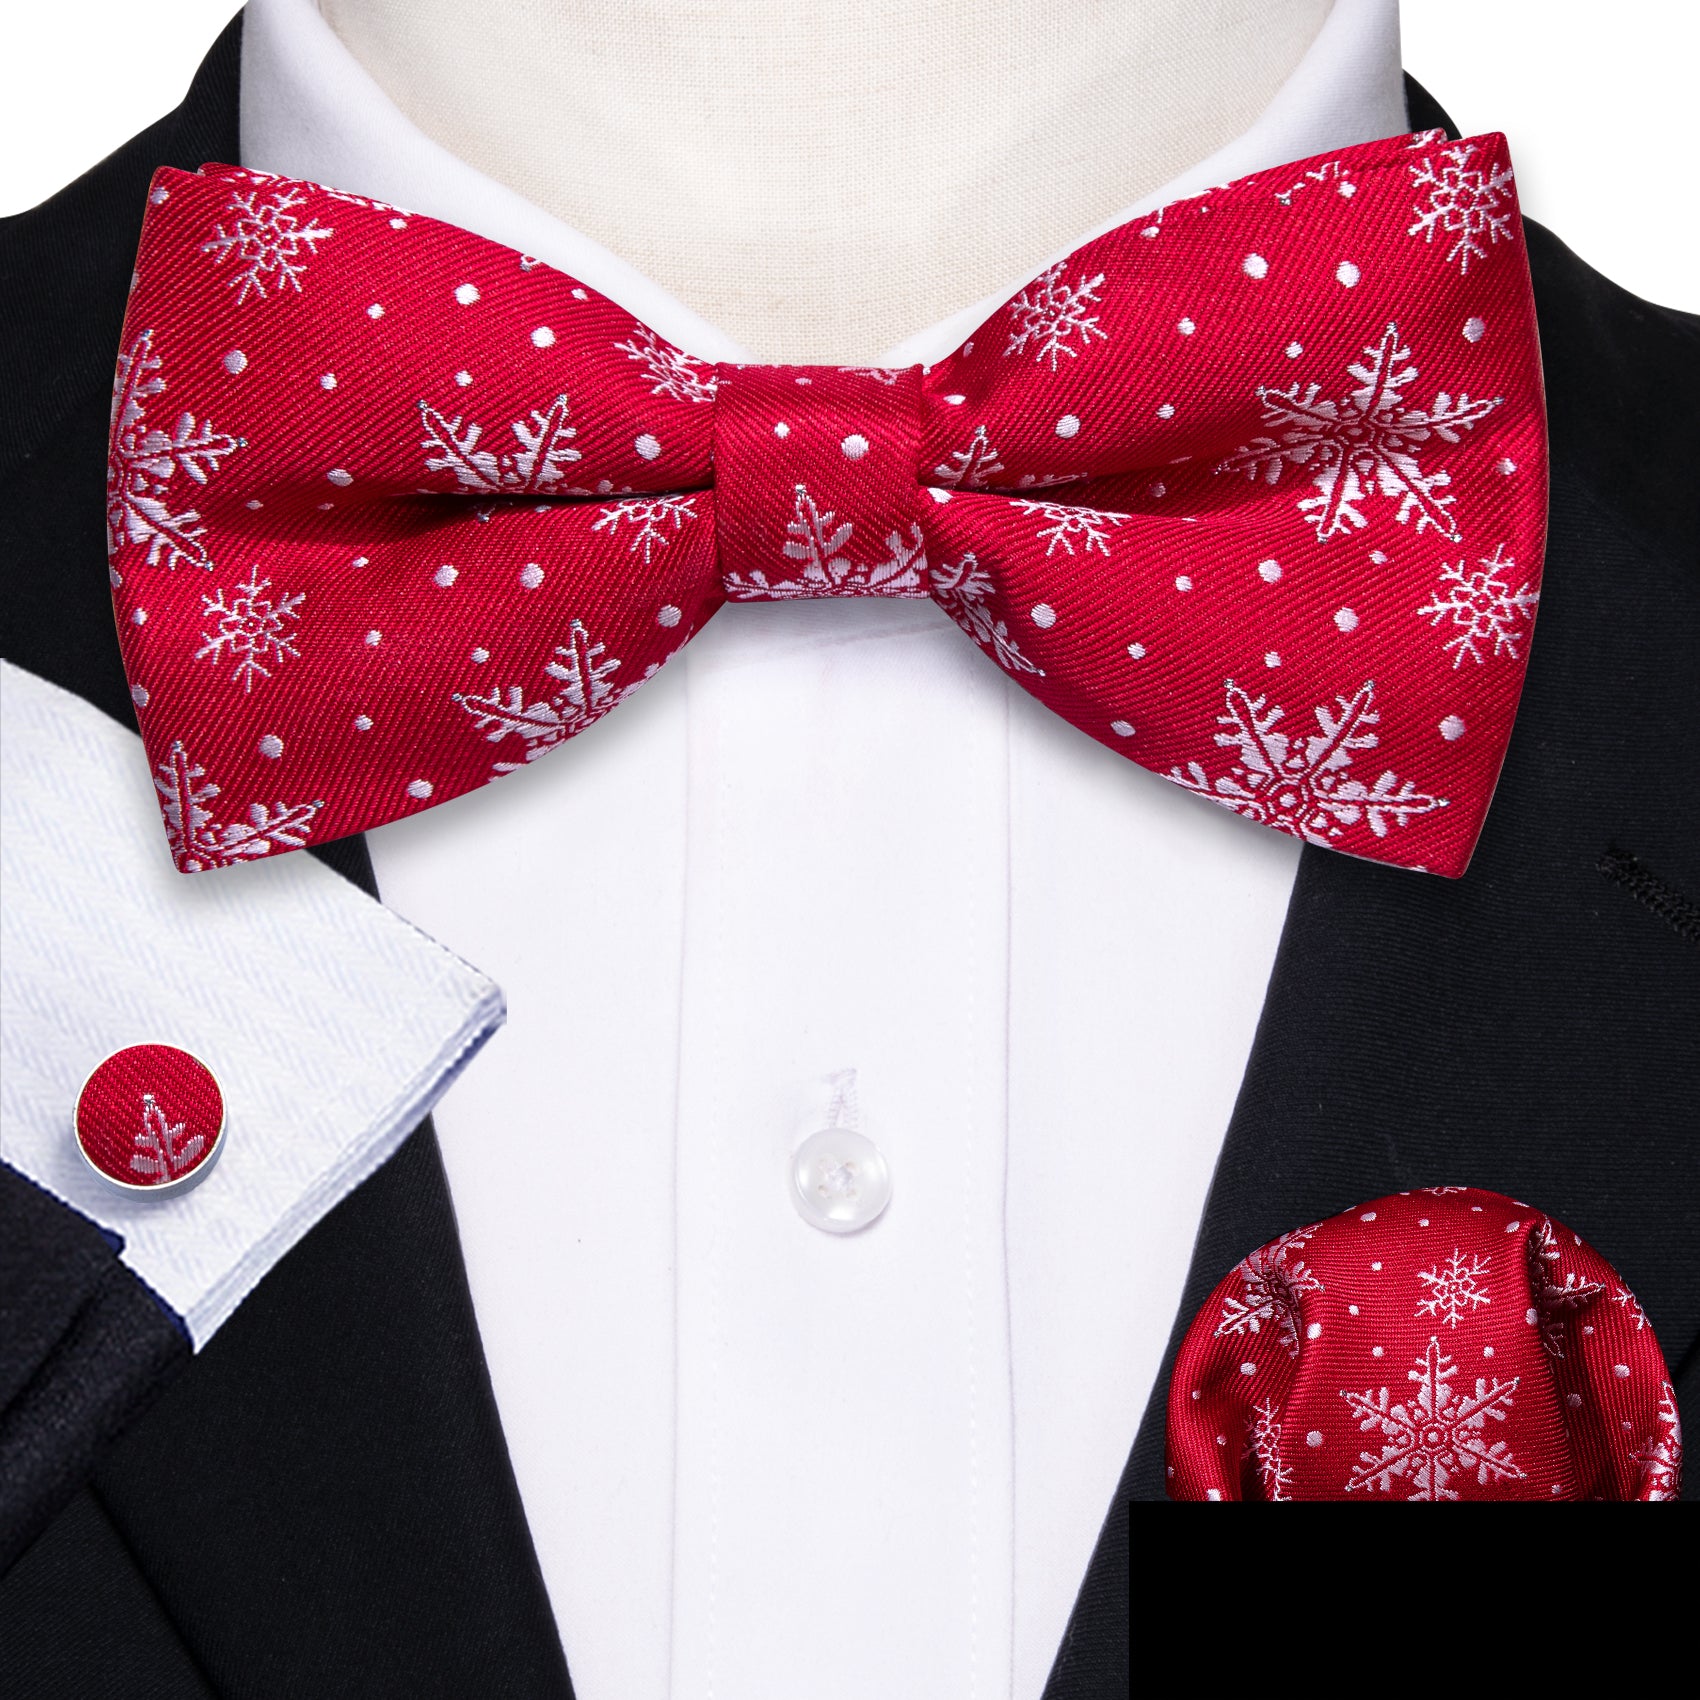 Christmas Red Snowflake Novelty Men's Pre-tied Bowtie Pocket Square Cu ...